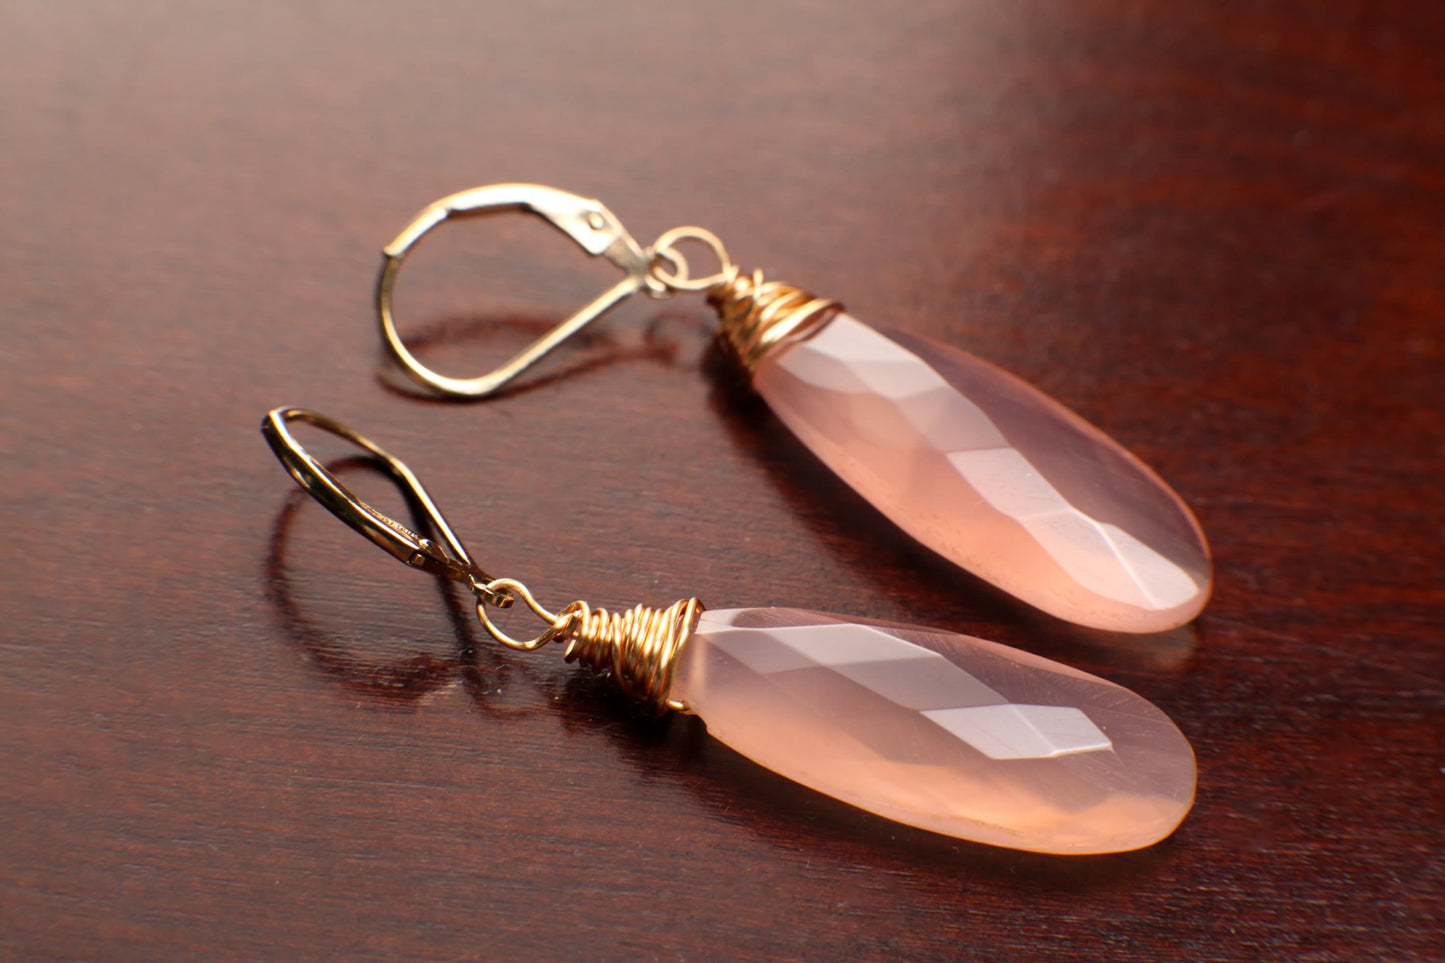 Pink Chalcedony faceted 10x 30mm long drop 14k gold filled Leverback earring. Handmade baby pink earring gift